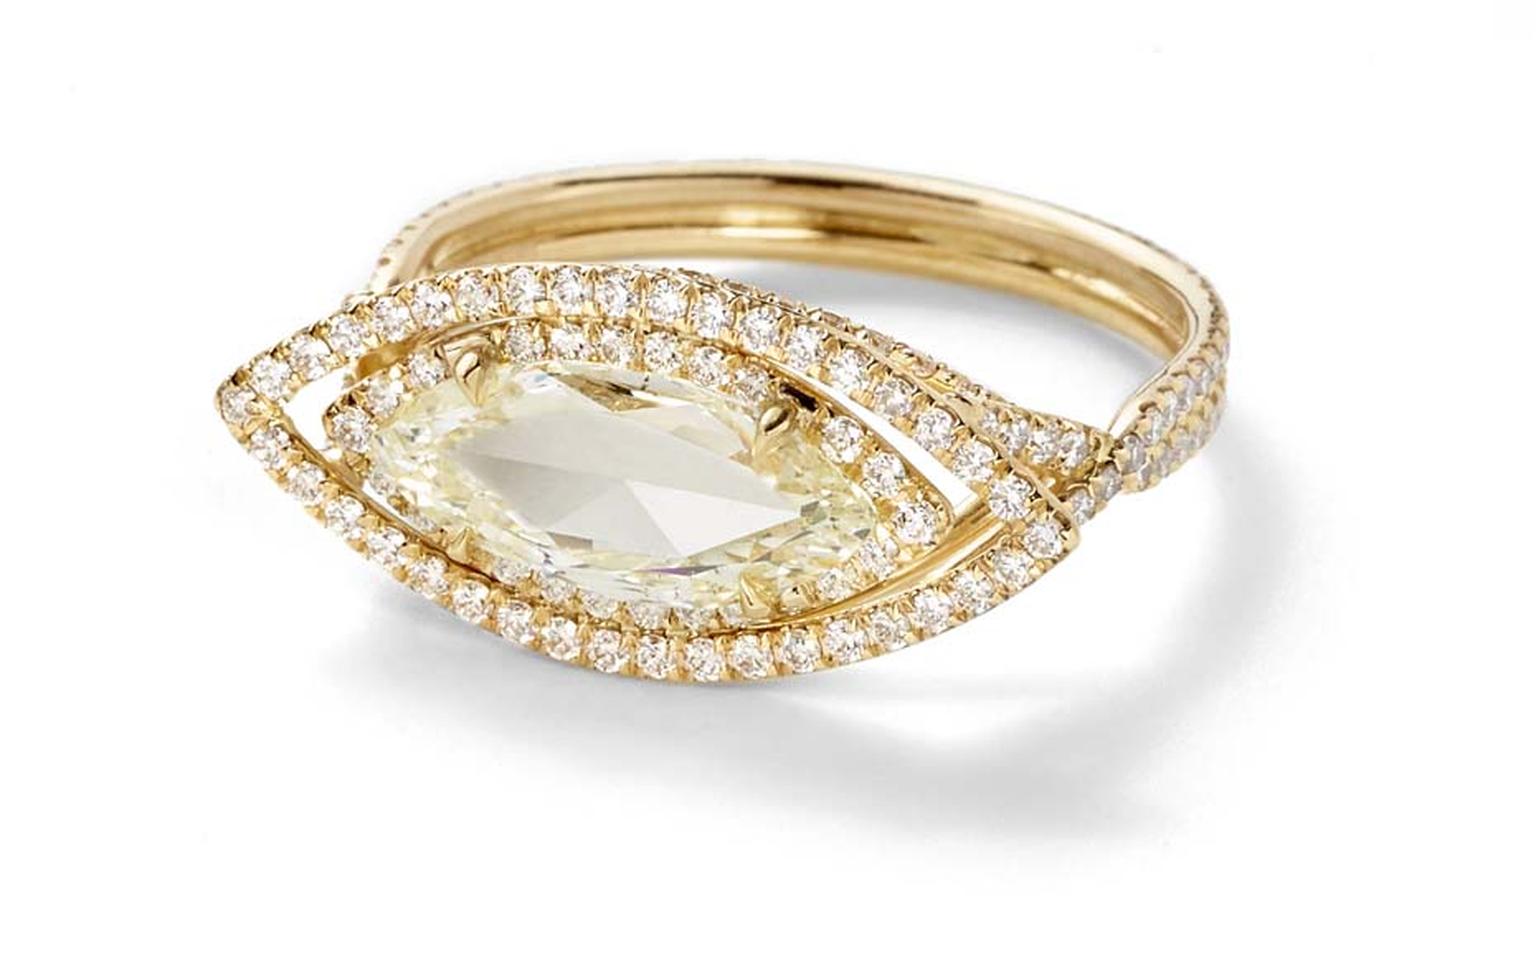 Monique Péan Mineraux engagement ring in recycled yellow gold, set with a light yellow marquise rose cut diamond and diamond pavé ($24,820)